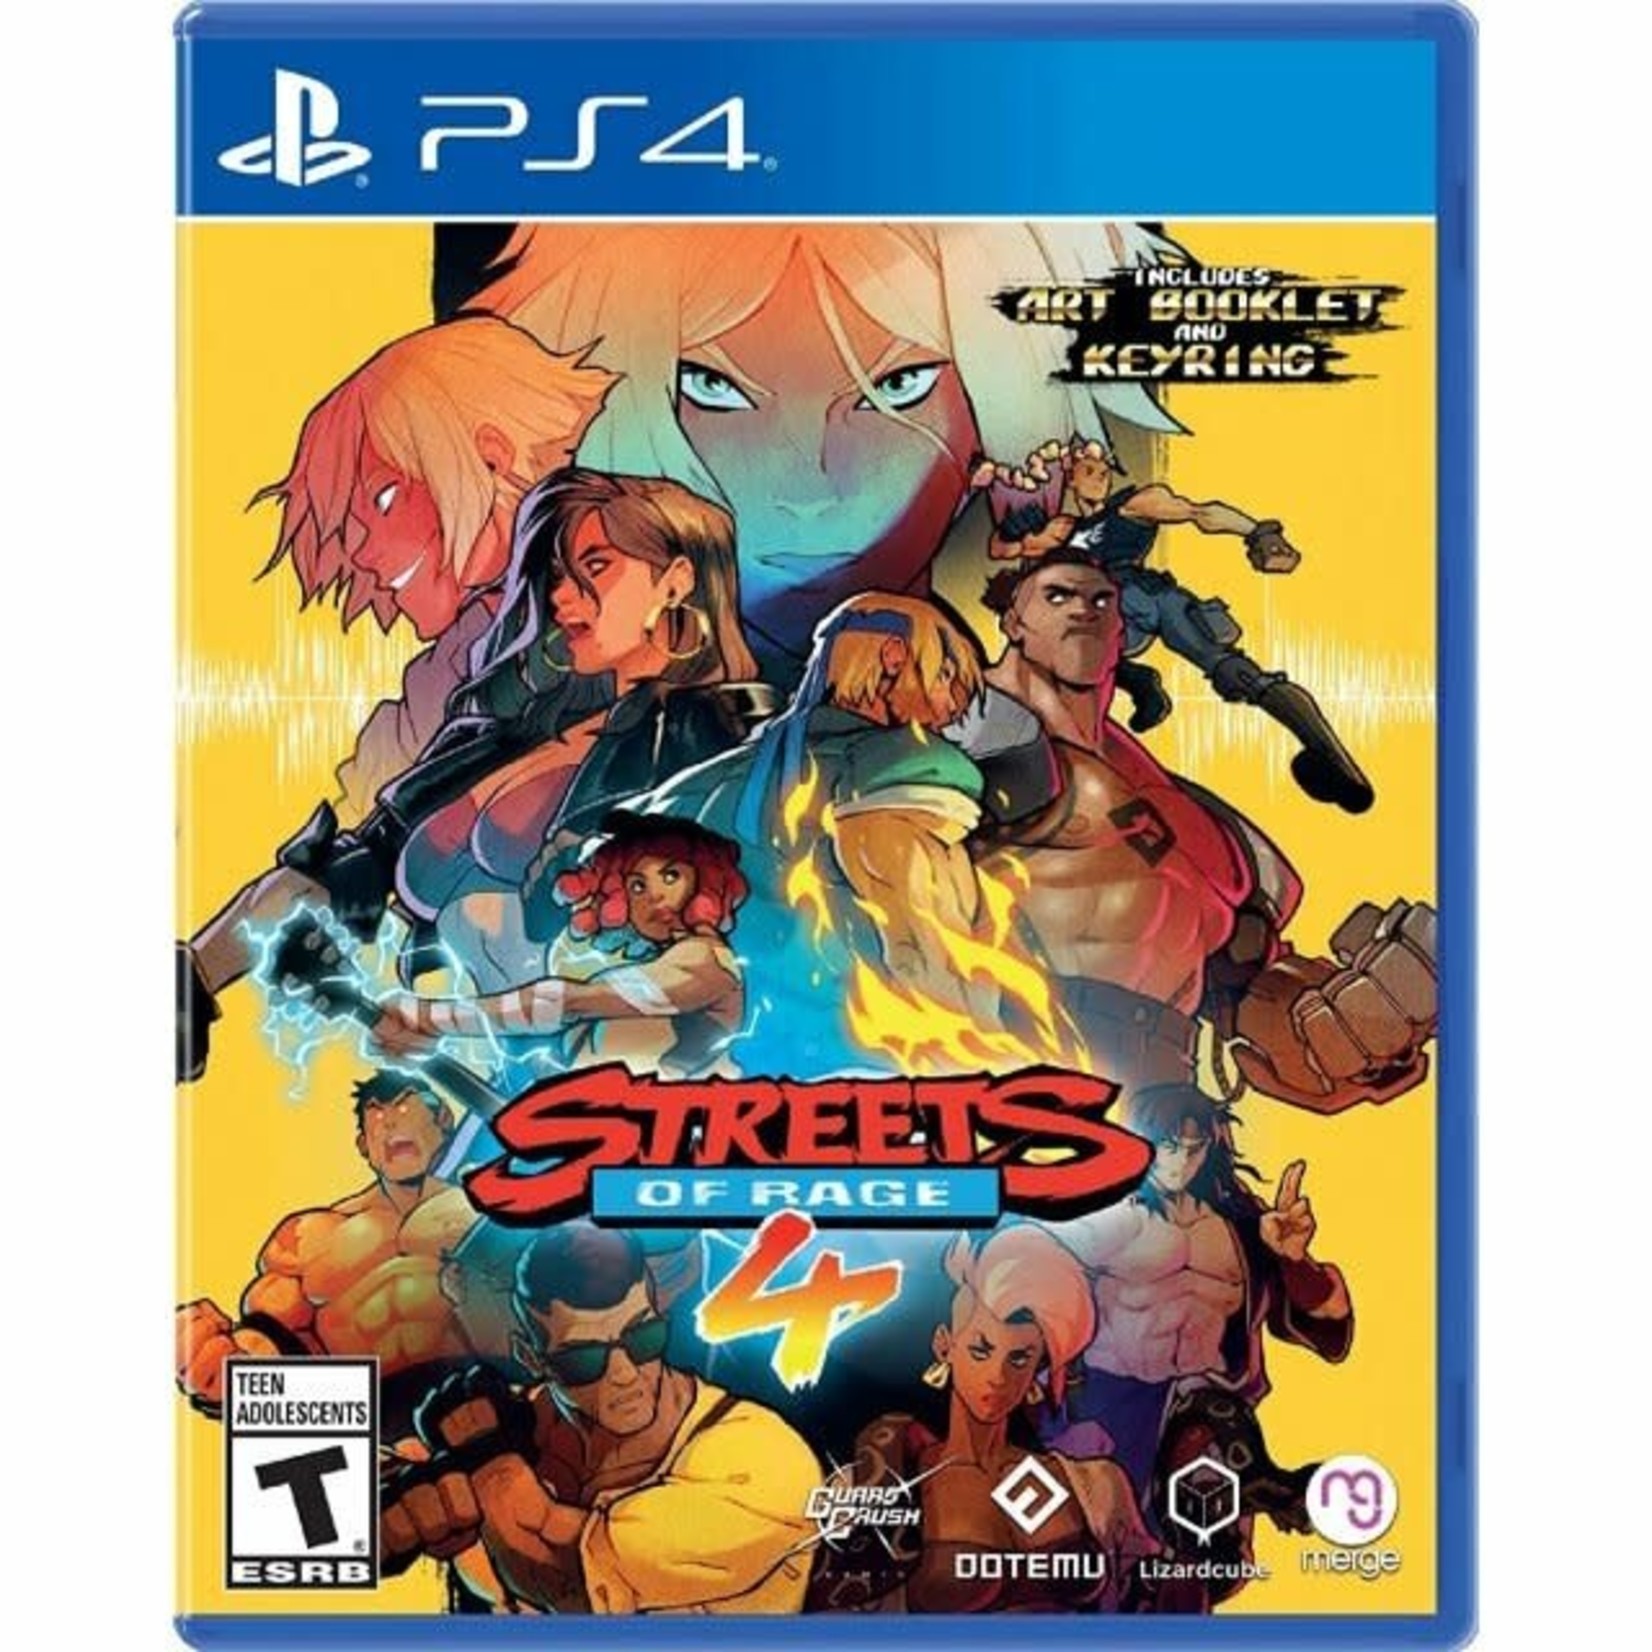 PS4-STREETS OF RAGE 4